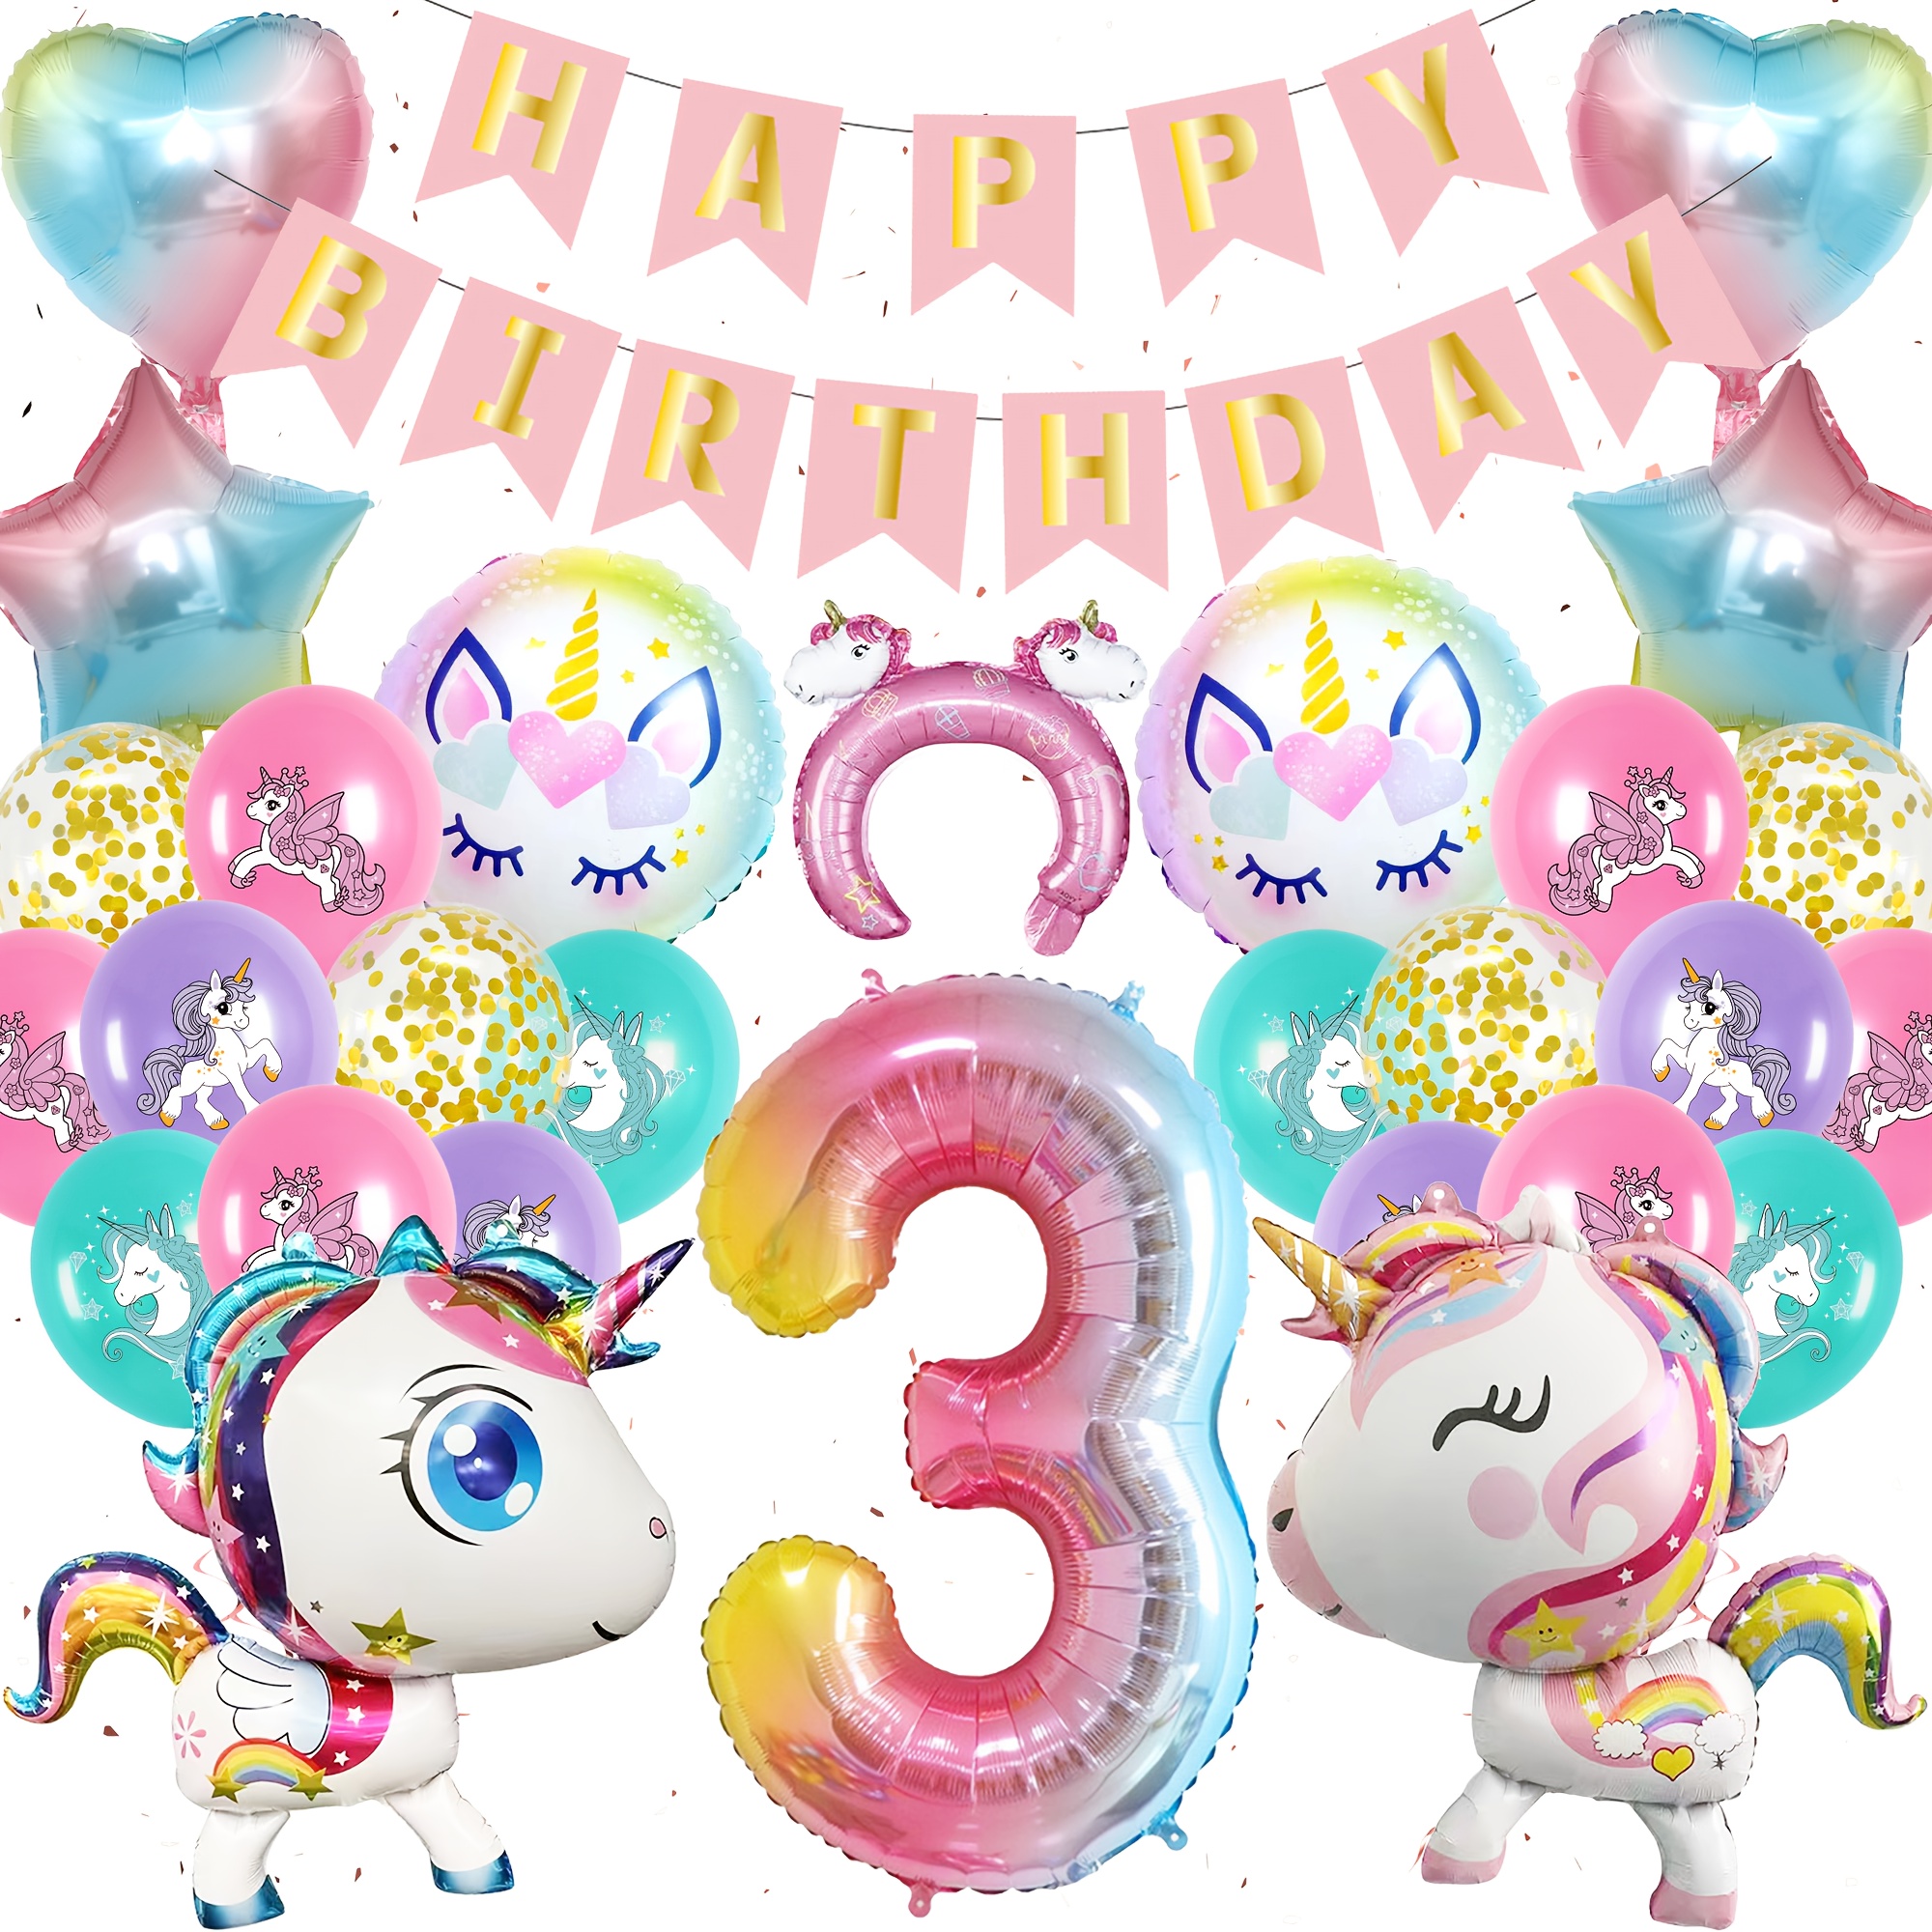 

43pcs Unicorn Balloon Birthday Party Decoration, Pink Large Unicorn Gradient Giant Number "3" "4" "5" "6" Aluminum Foil Balloon, Suitable For Girls "3" "4" "5" "6" Birthday Party Girls